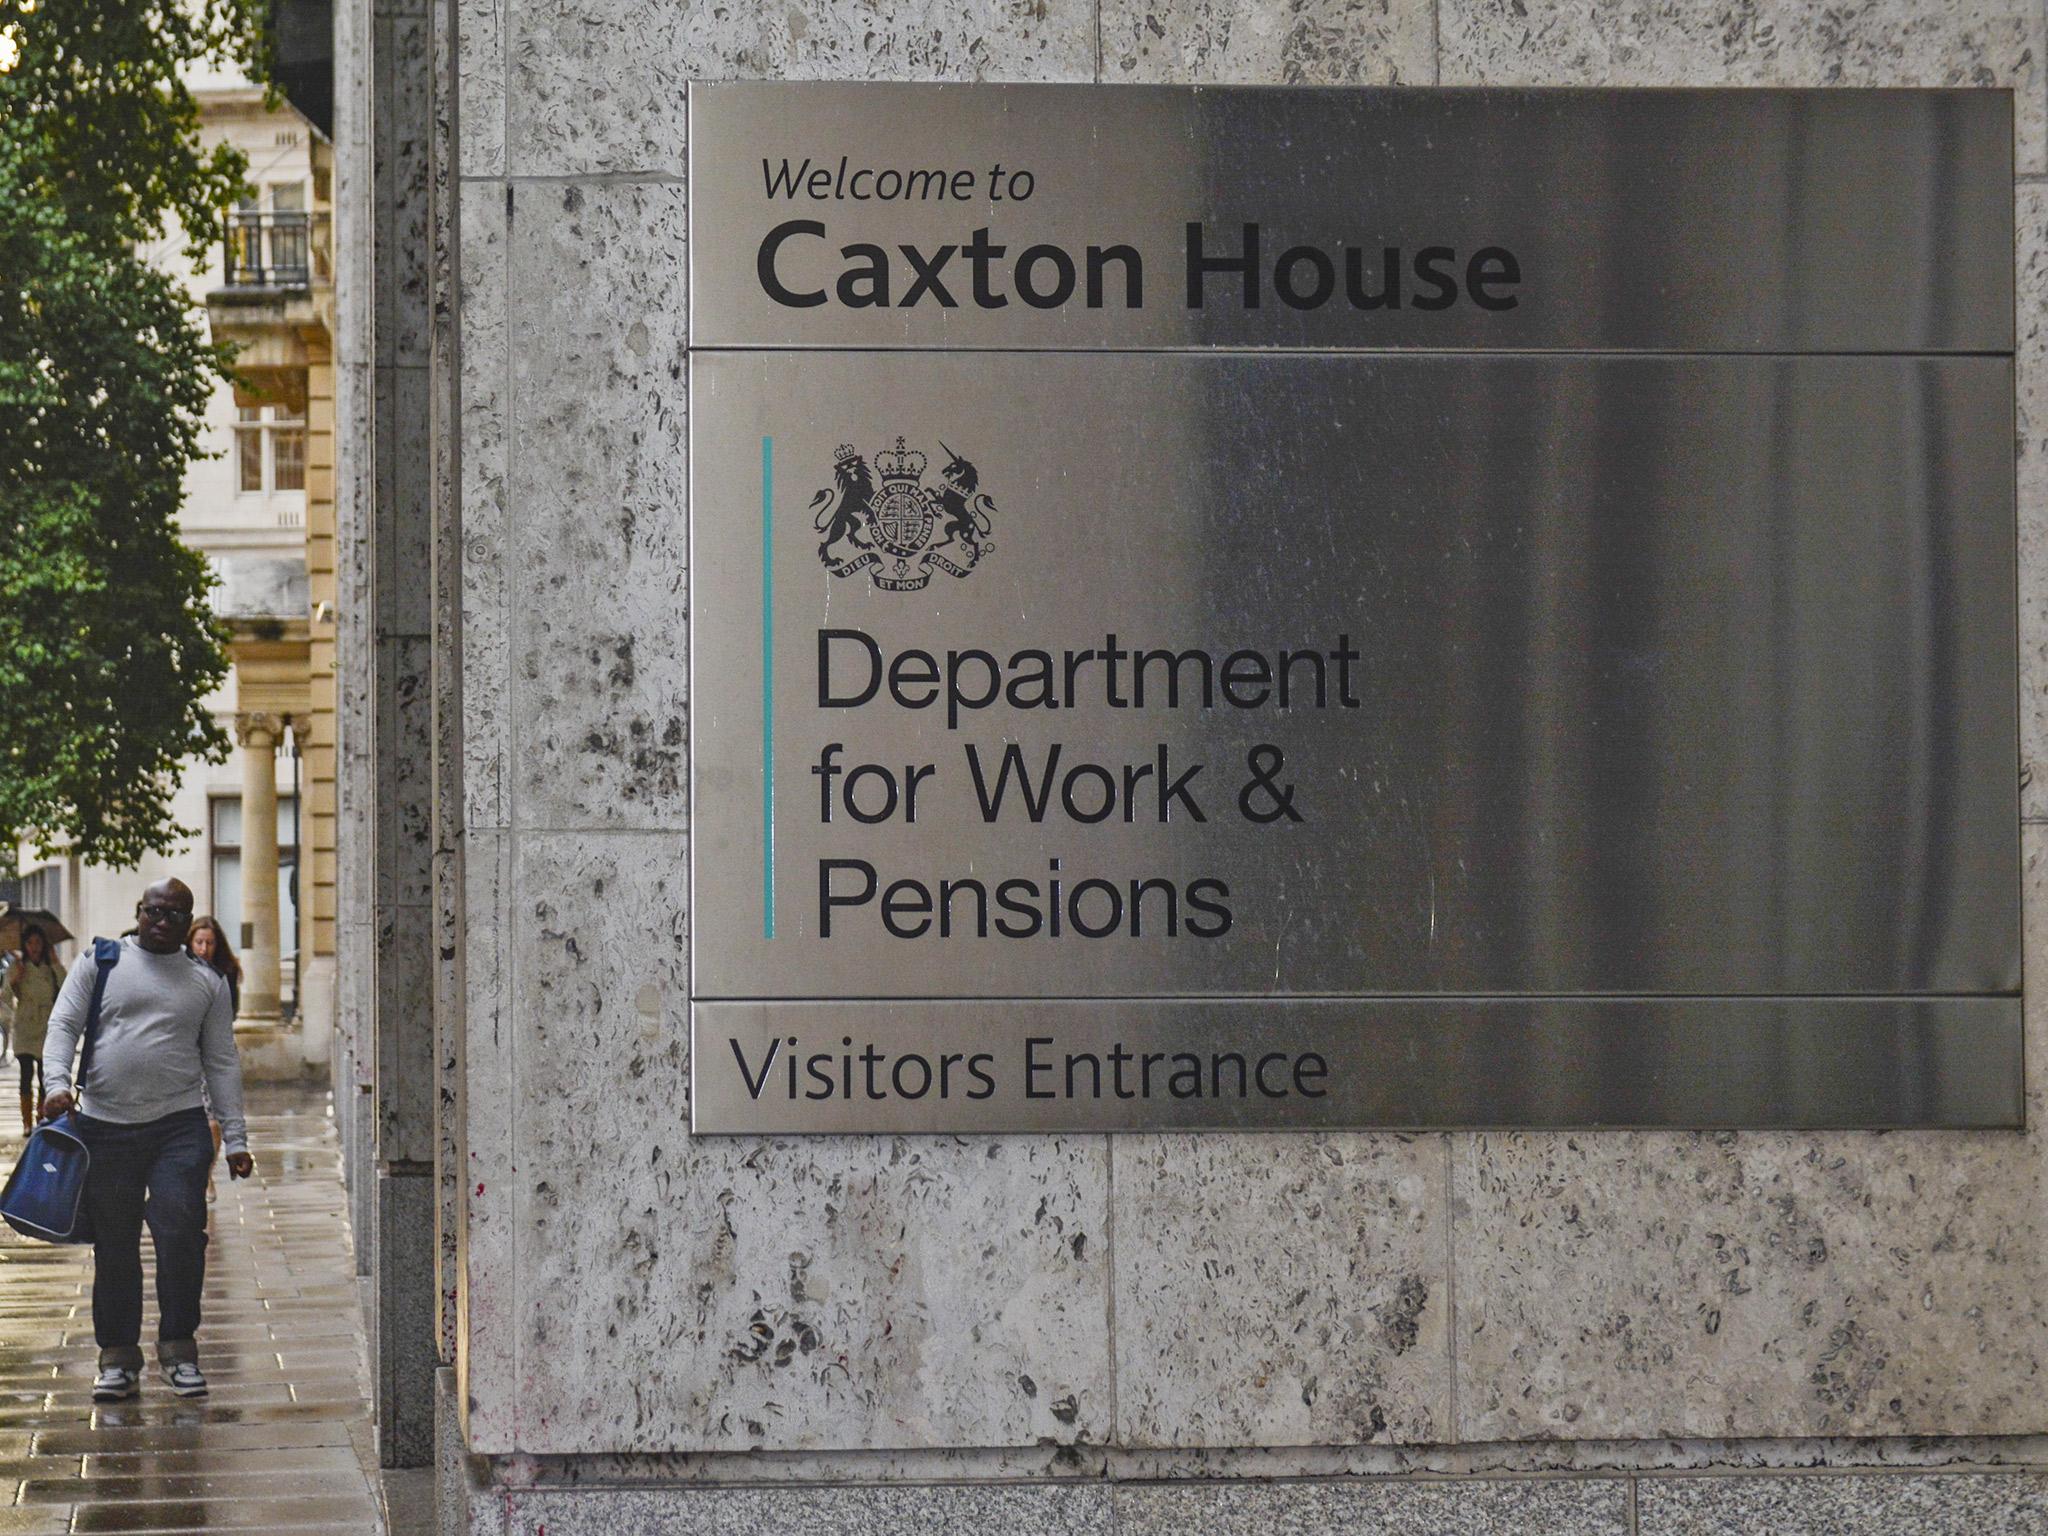 Universal credit is overseen by the Department for Work and Pensions